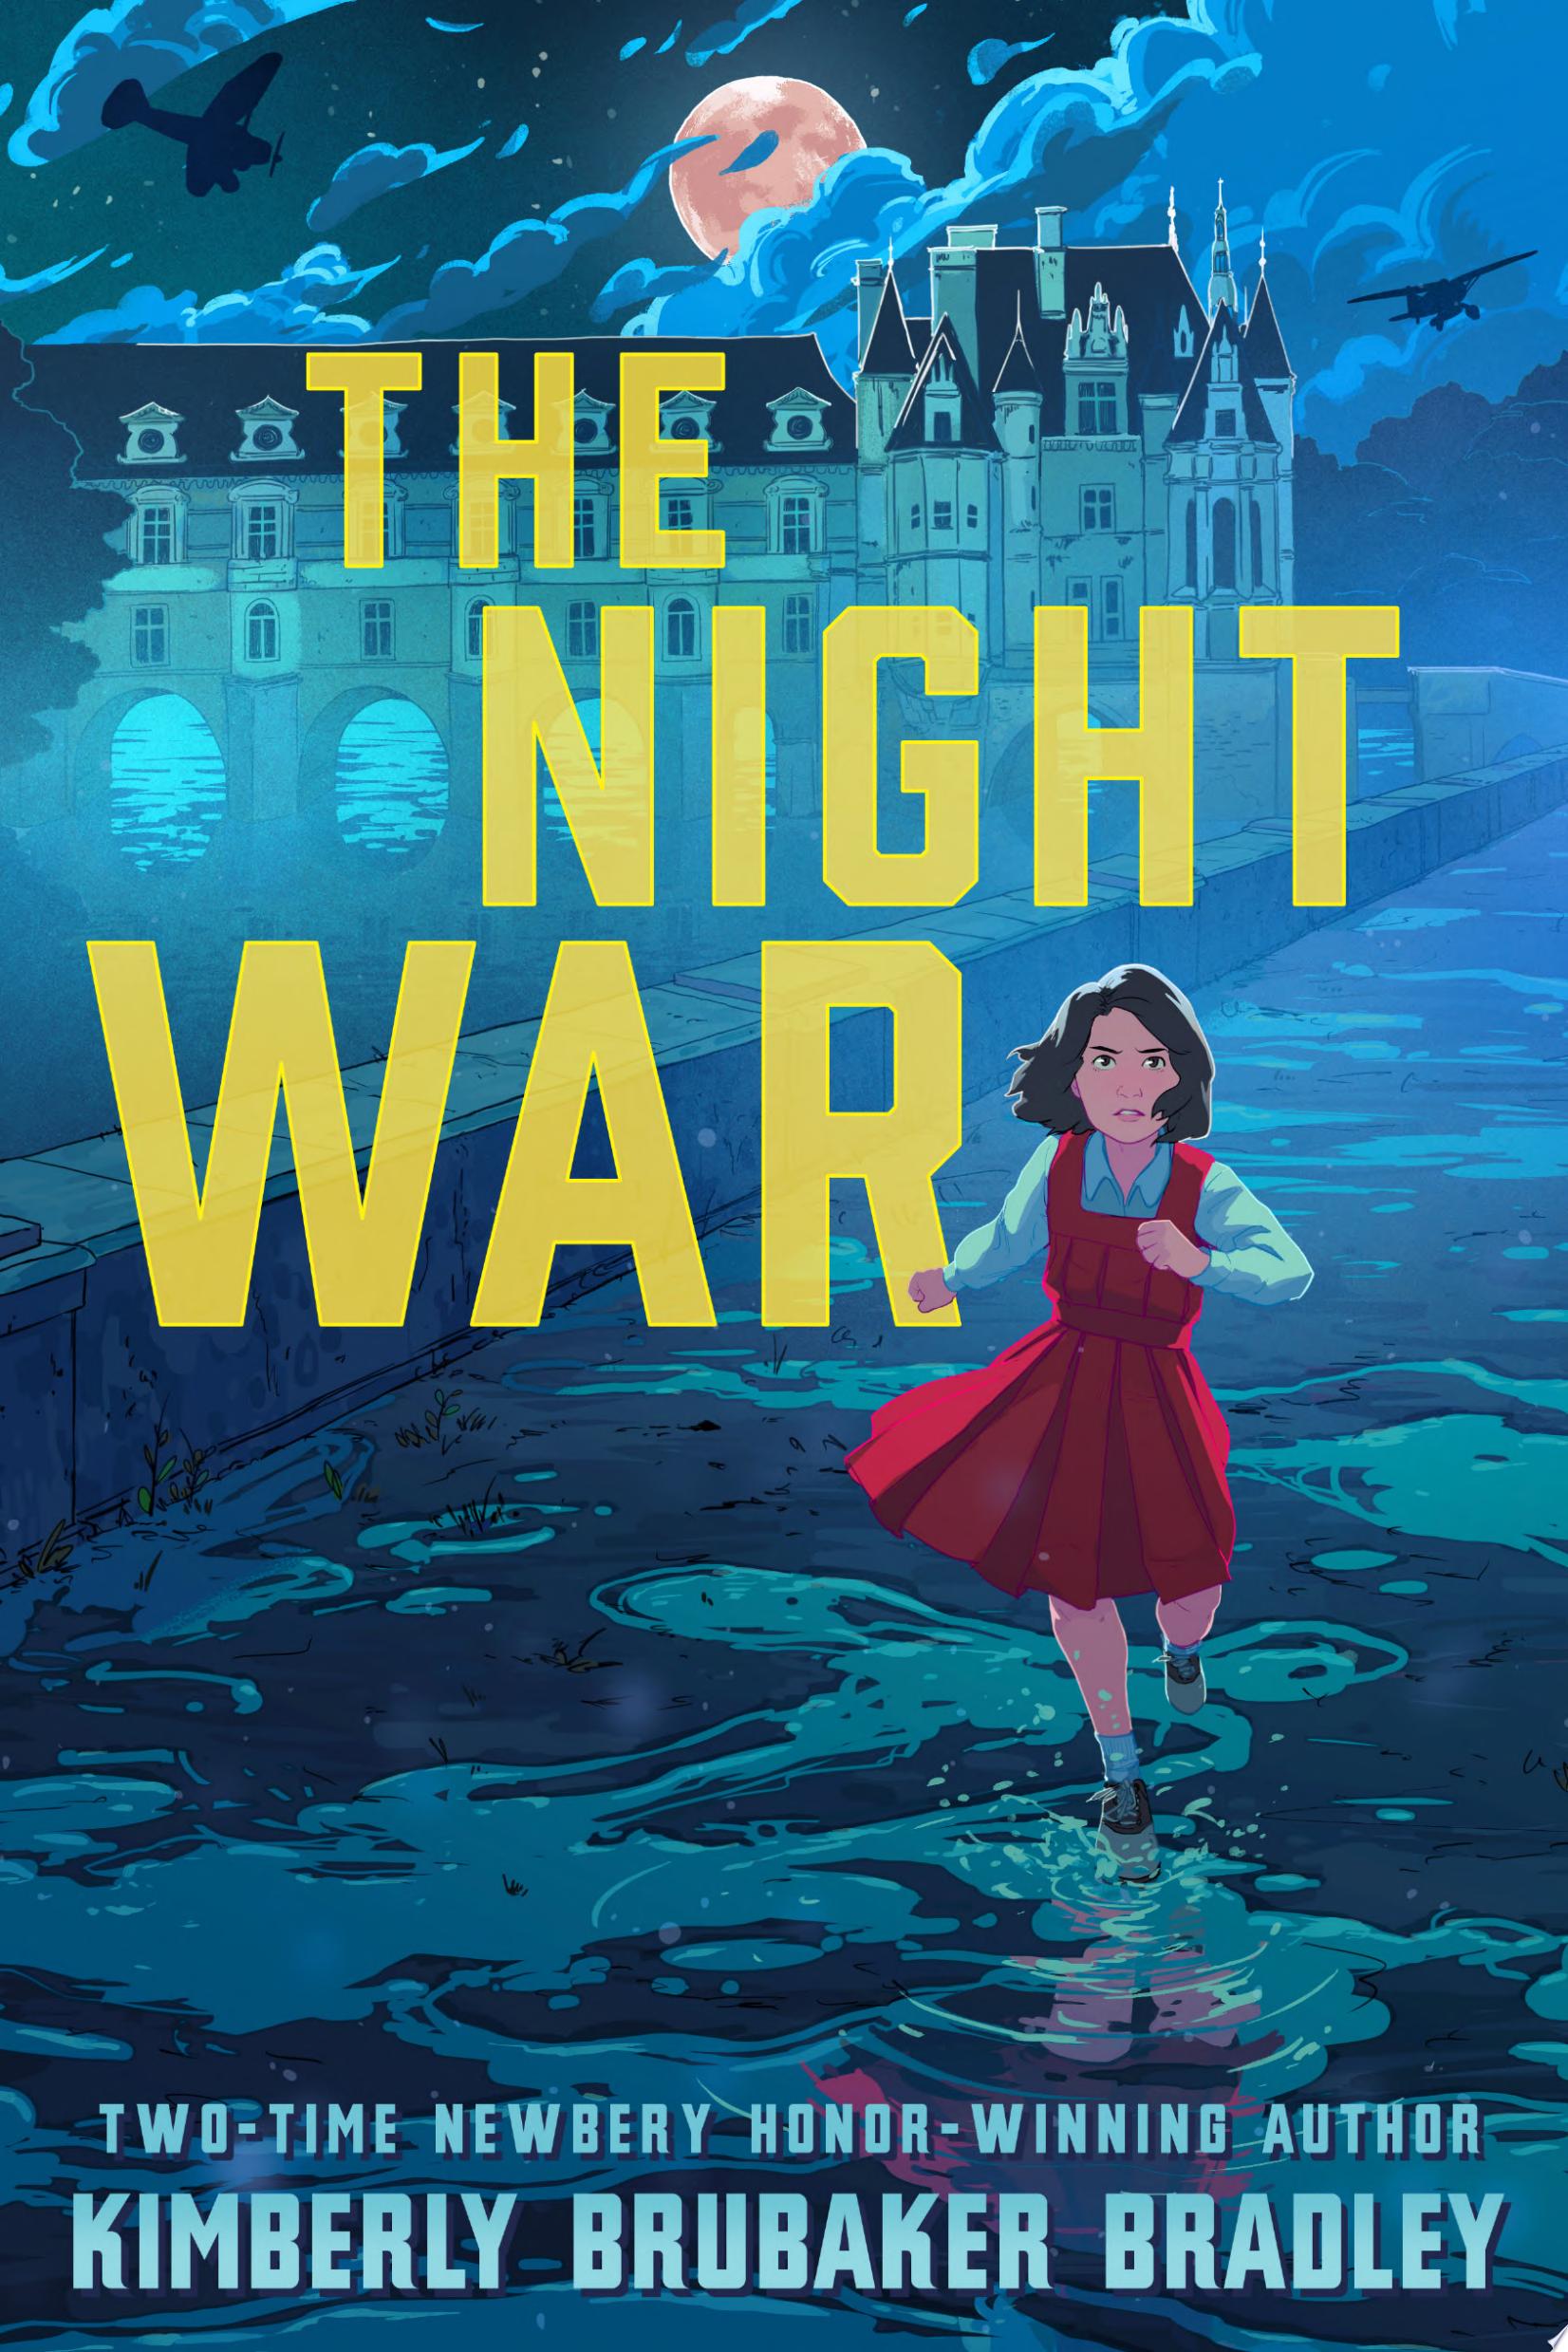 Image for "The Night War"